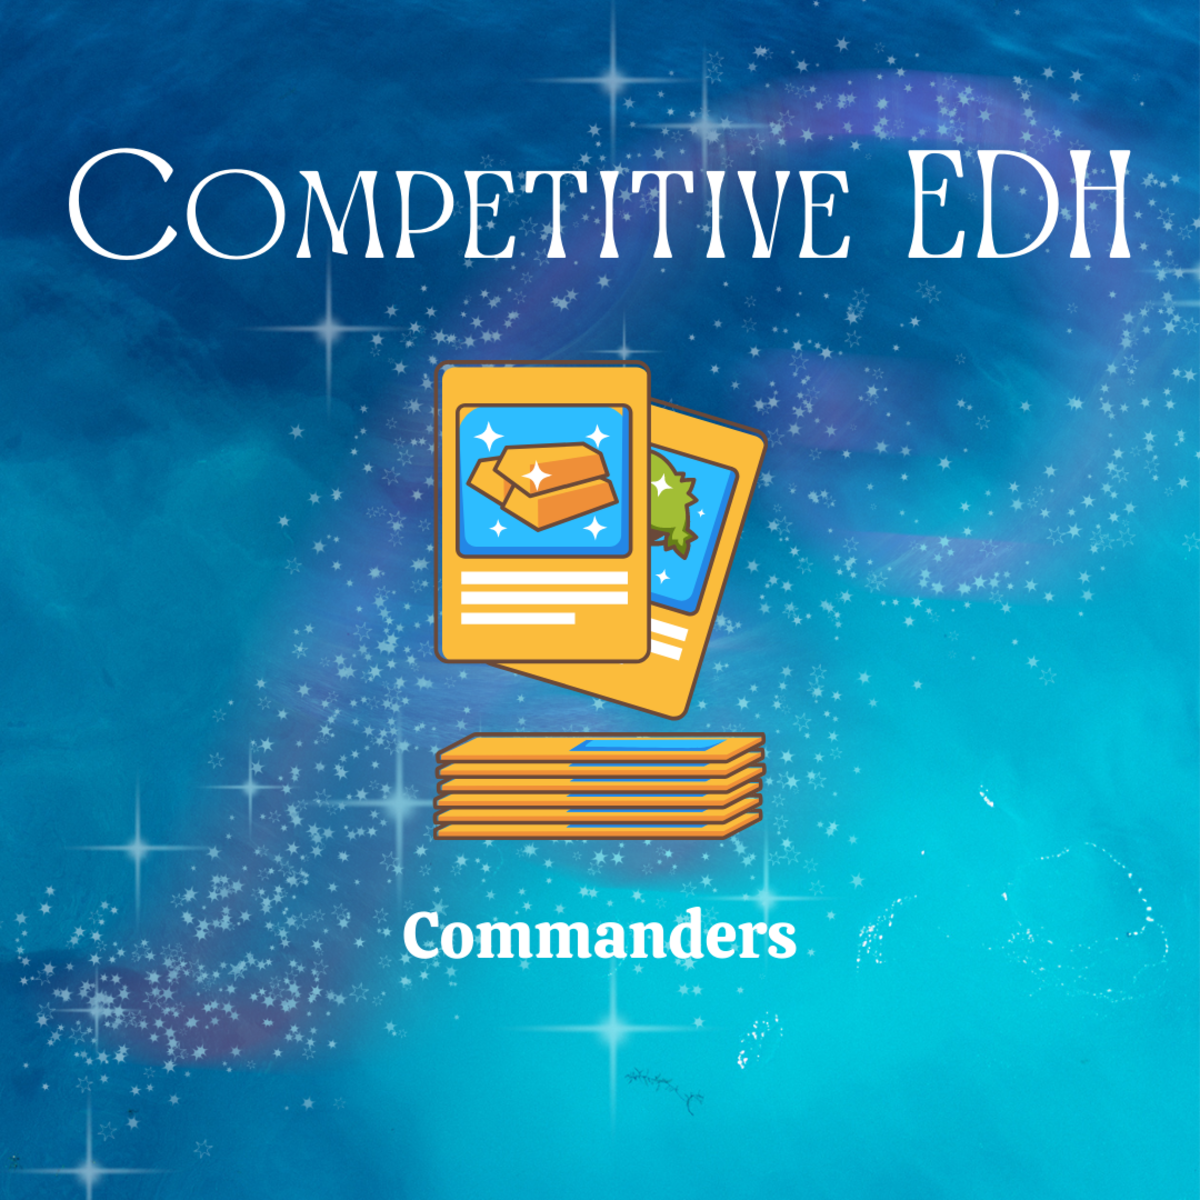 The Top Commanders in Competitive EDH